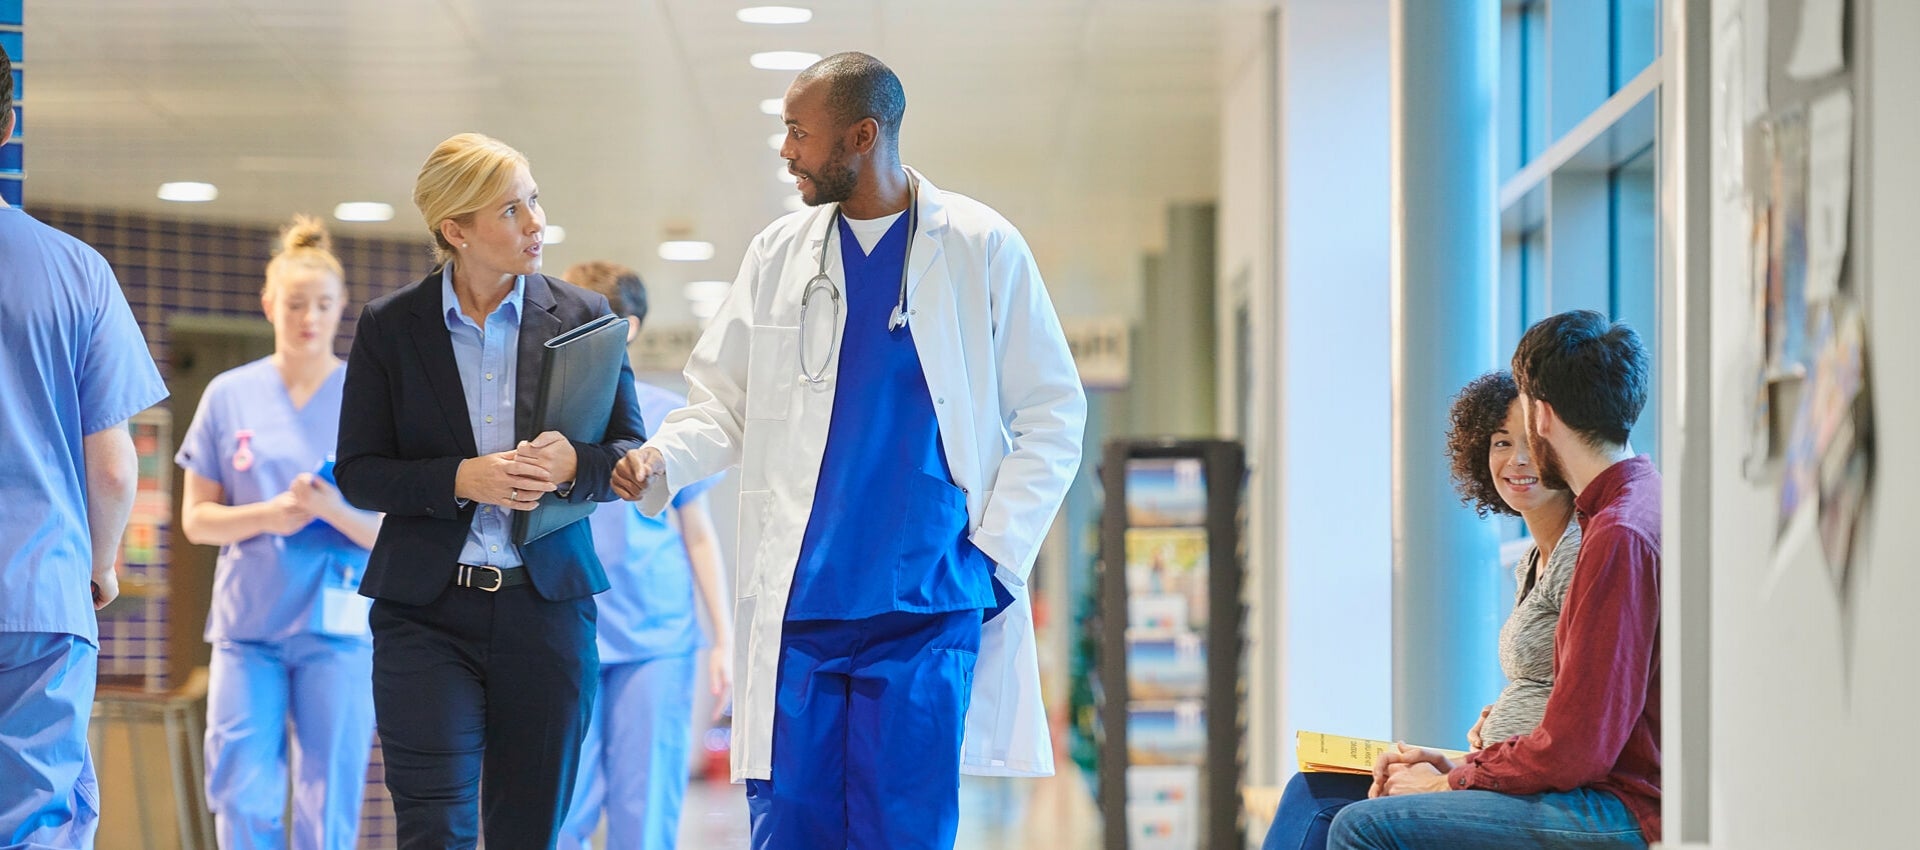 Healthcare administrator and doctor walk through hospital in conversation.